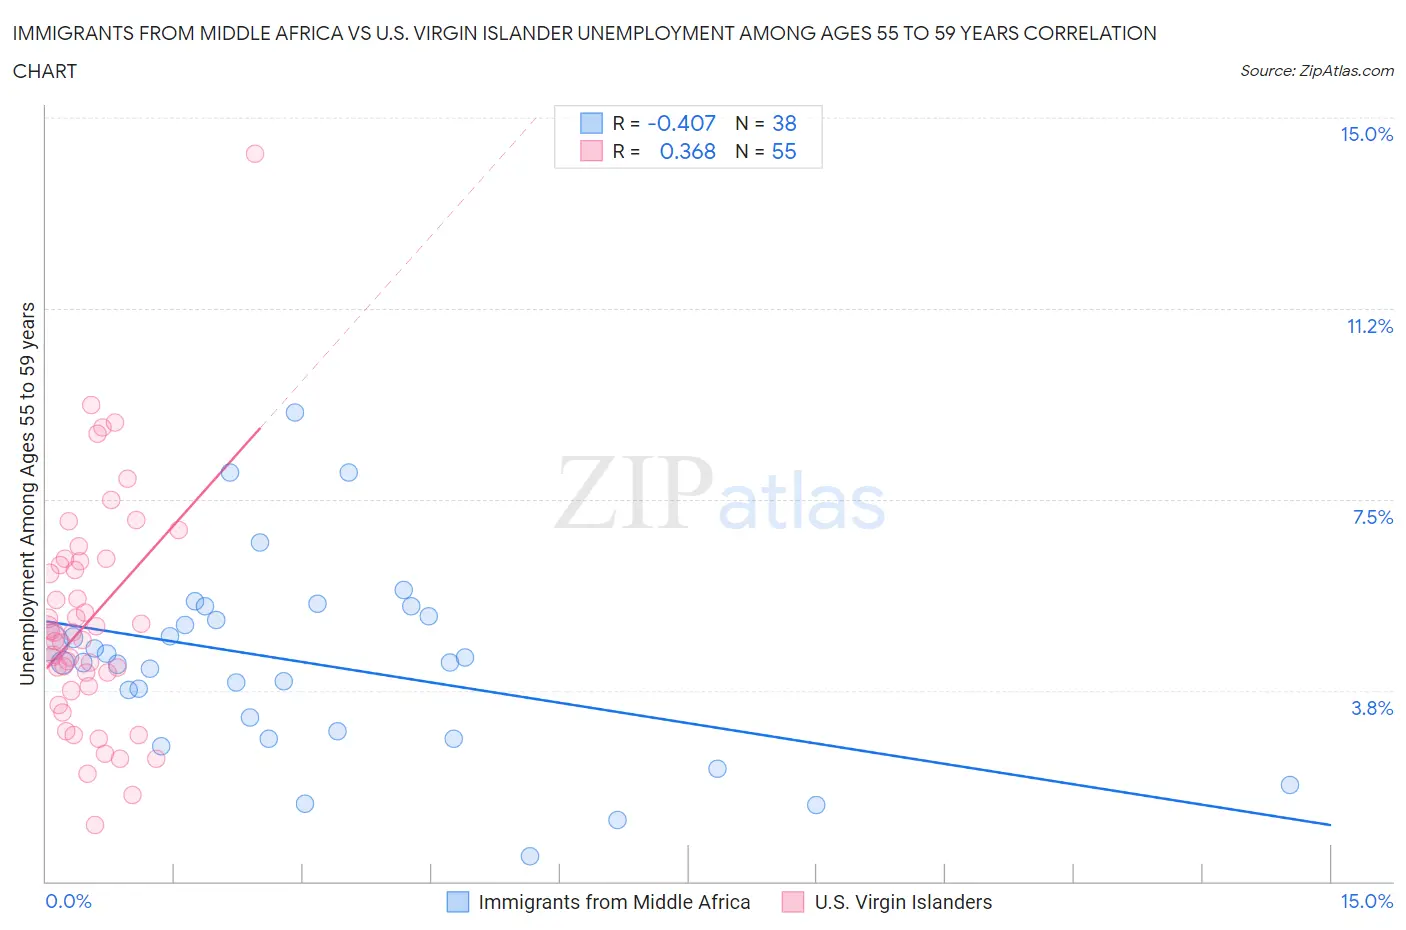 Immigrants from Middle Africa vs U.S. Virgin Islander Unemployment Among Ages 55 to 59 years